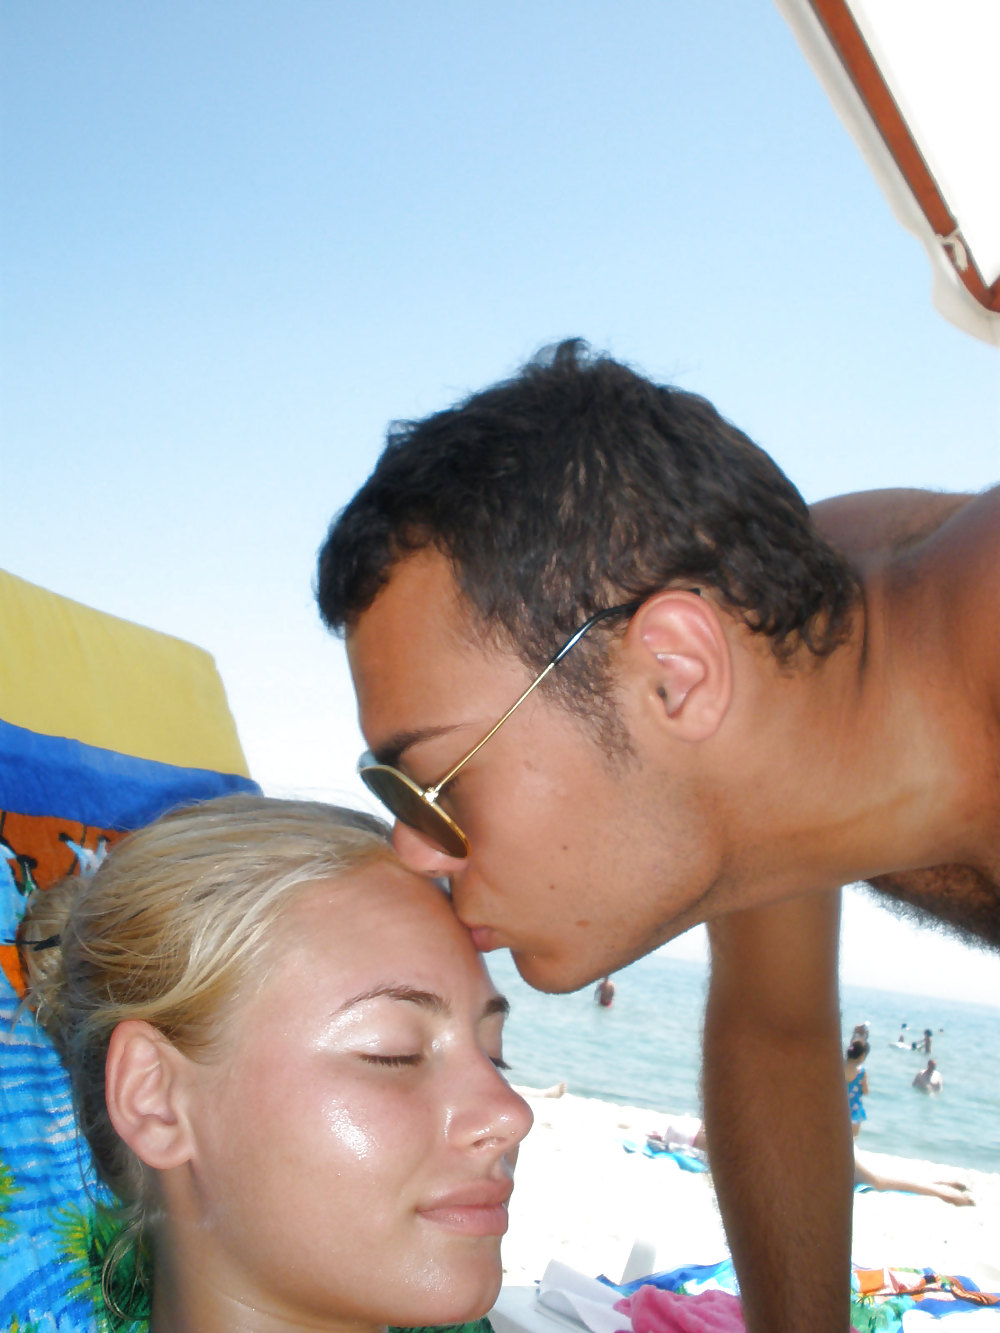 Sex vacation pics from a nice couple image